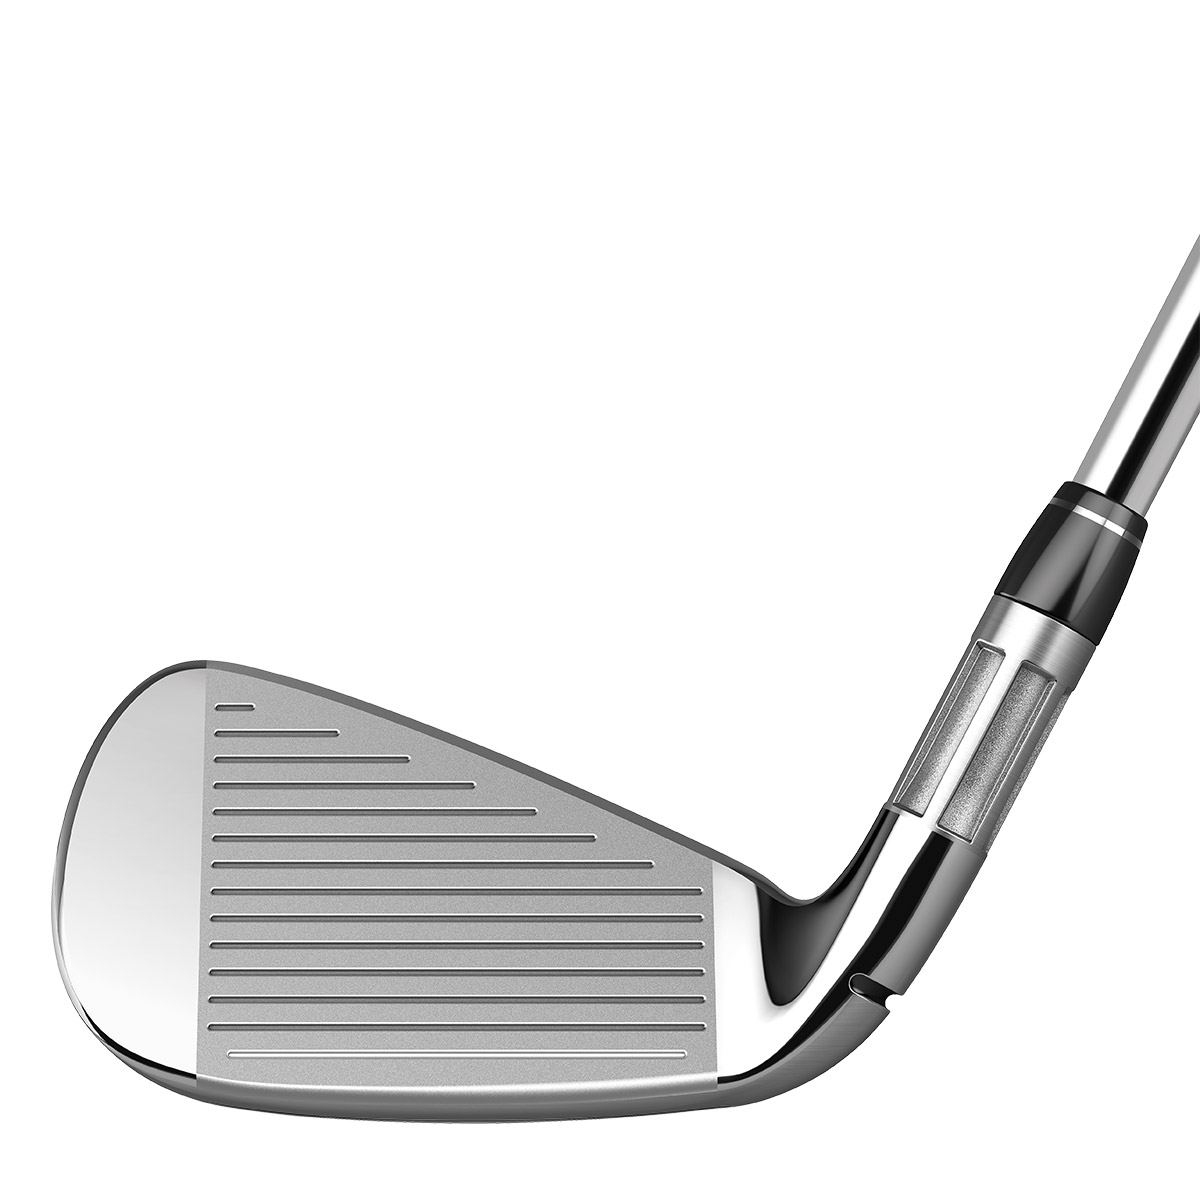 TaylorMade M6 Steel Golf Irons from american golf